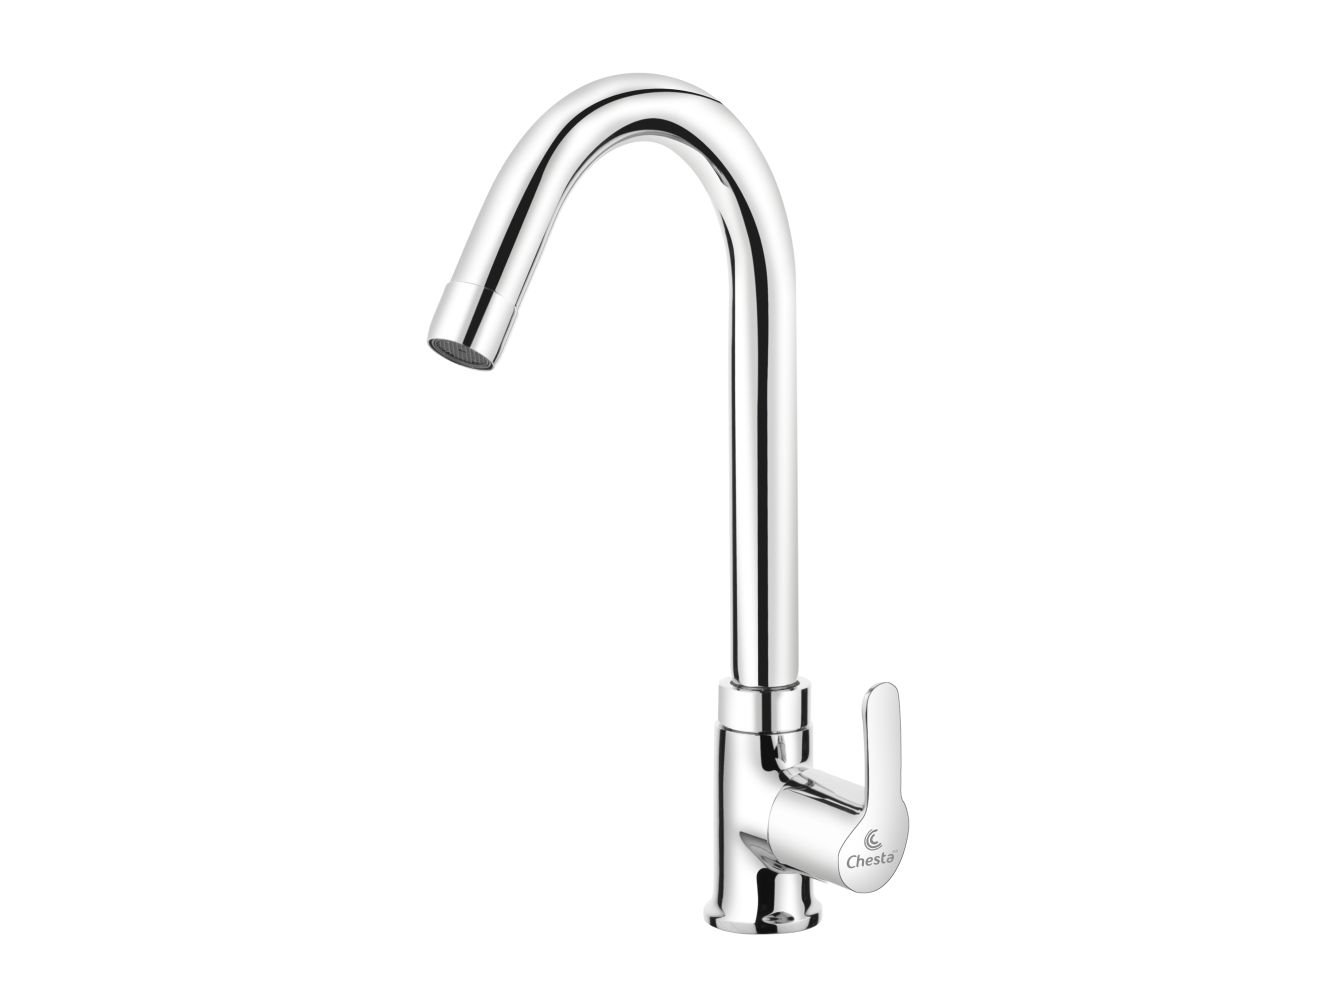 DR - 1008 - Swan Neck Faucets by Chesta Bath Fittings